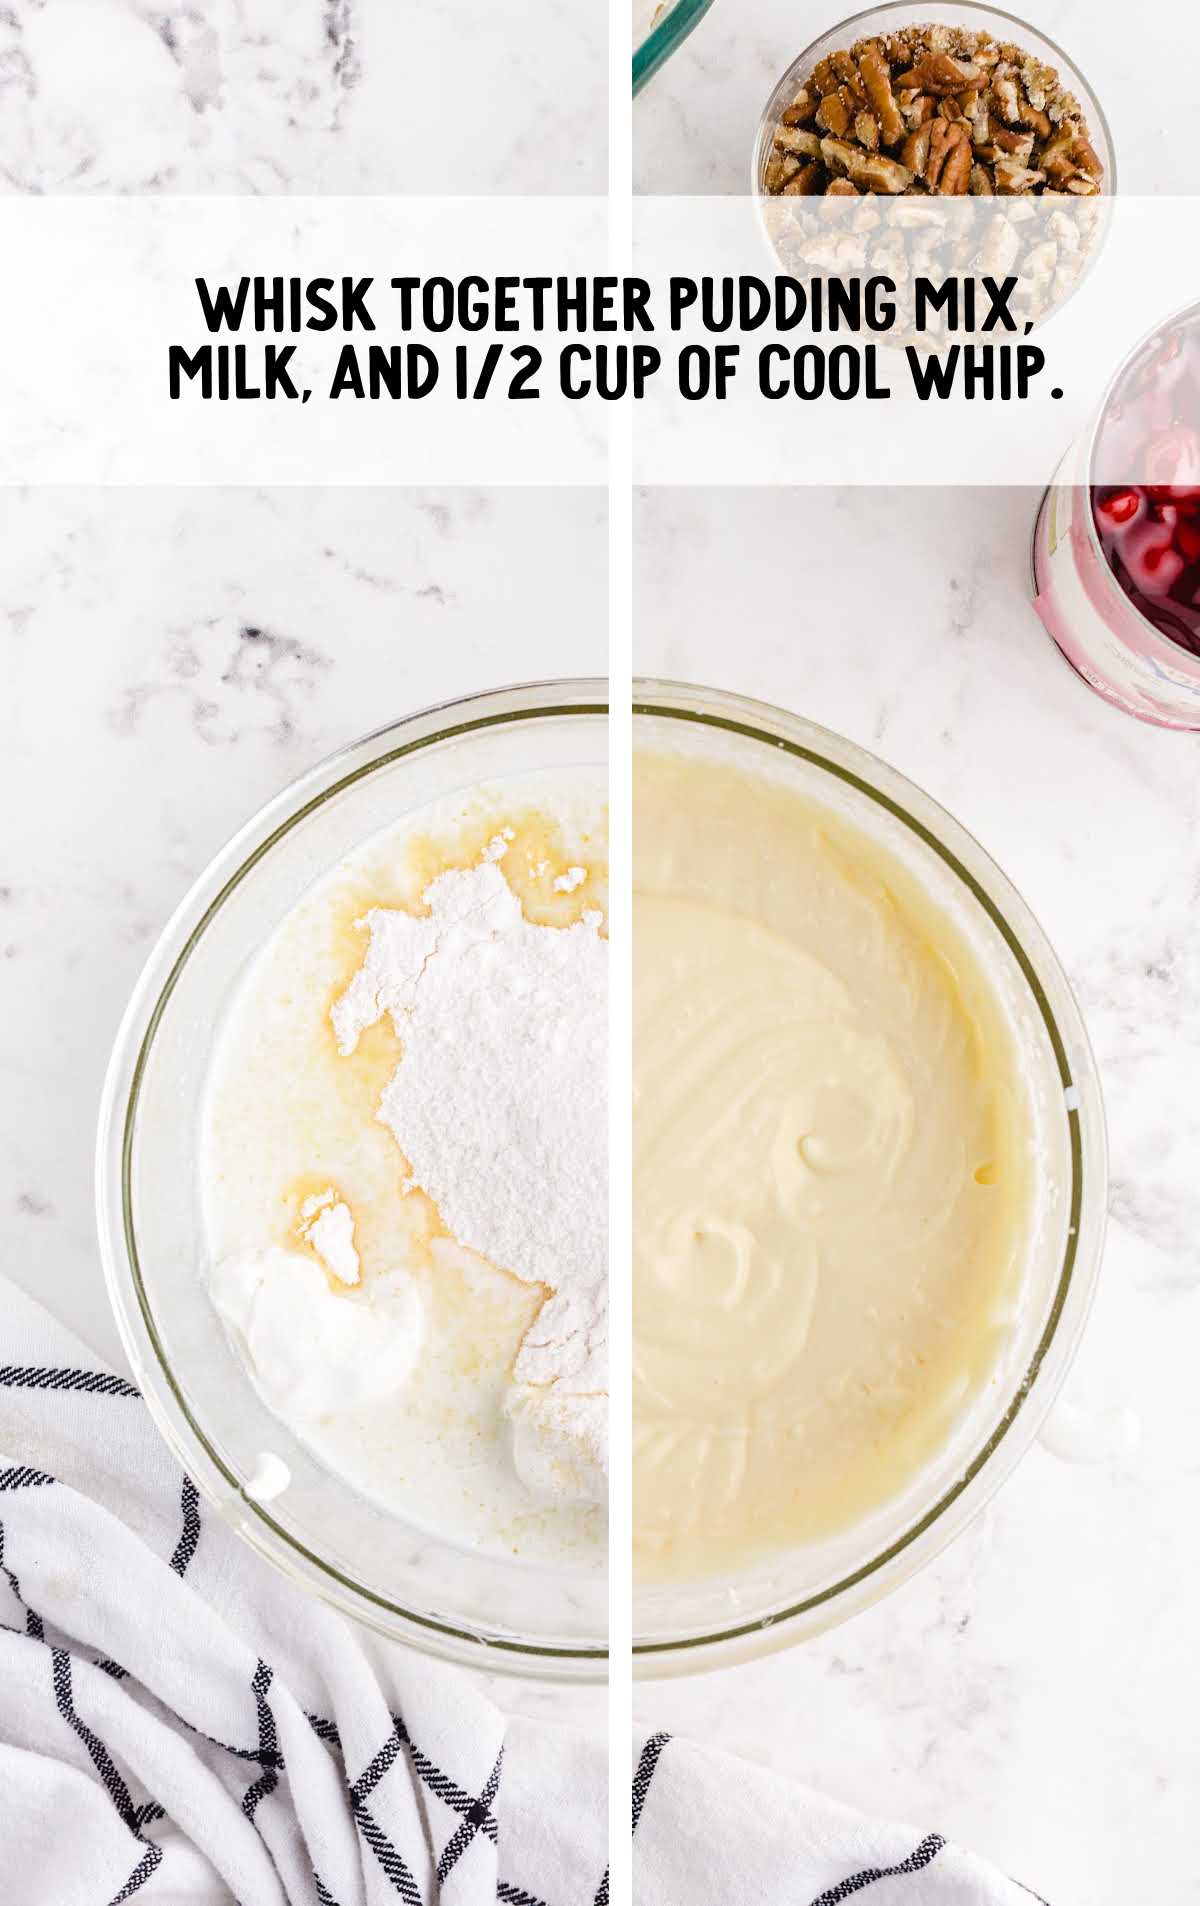 pudding mix, milk, and cool whip whisked together